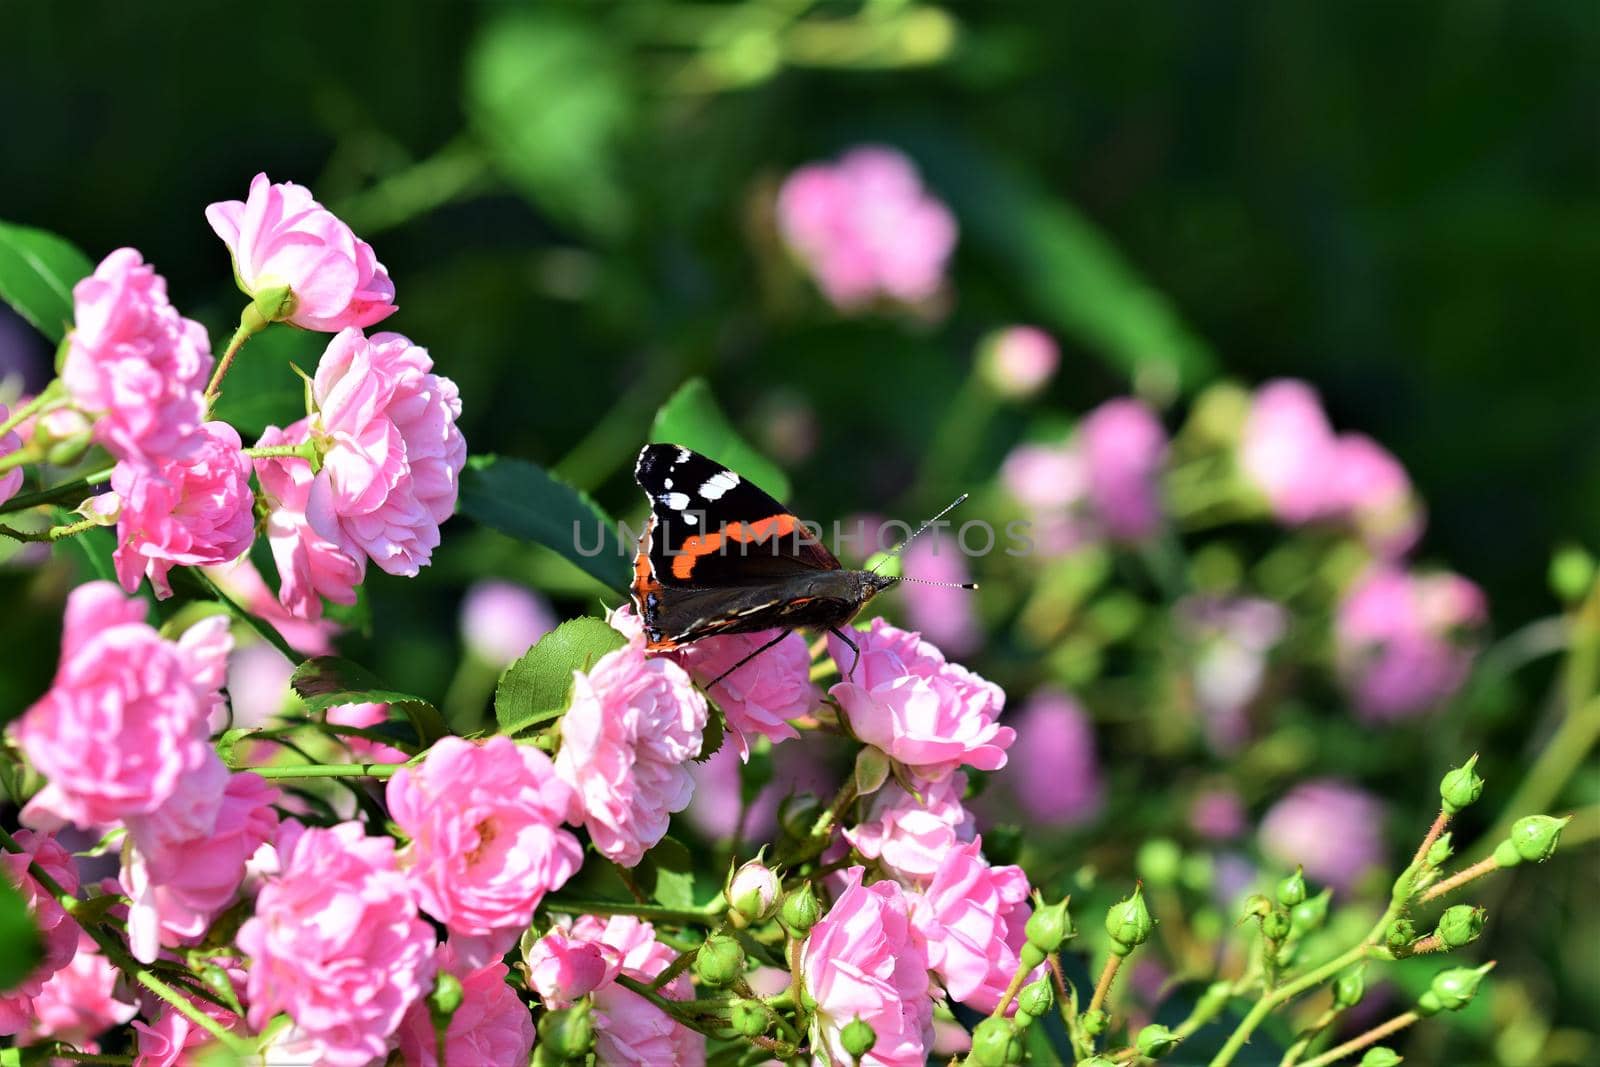 An Admiral butterfly in a pink rose bush against a blurred background